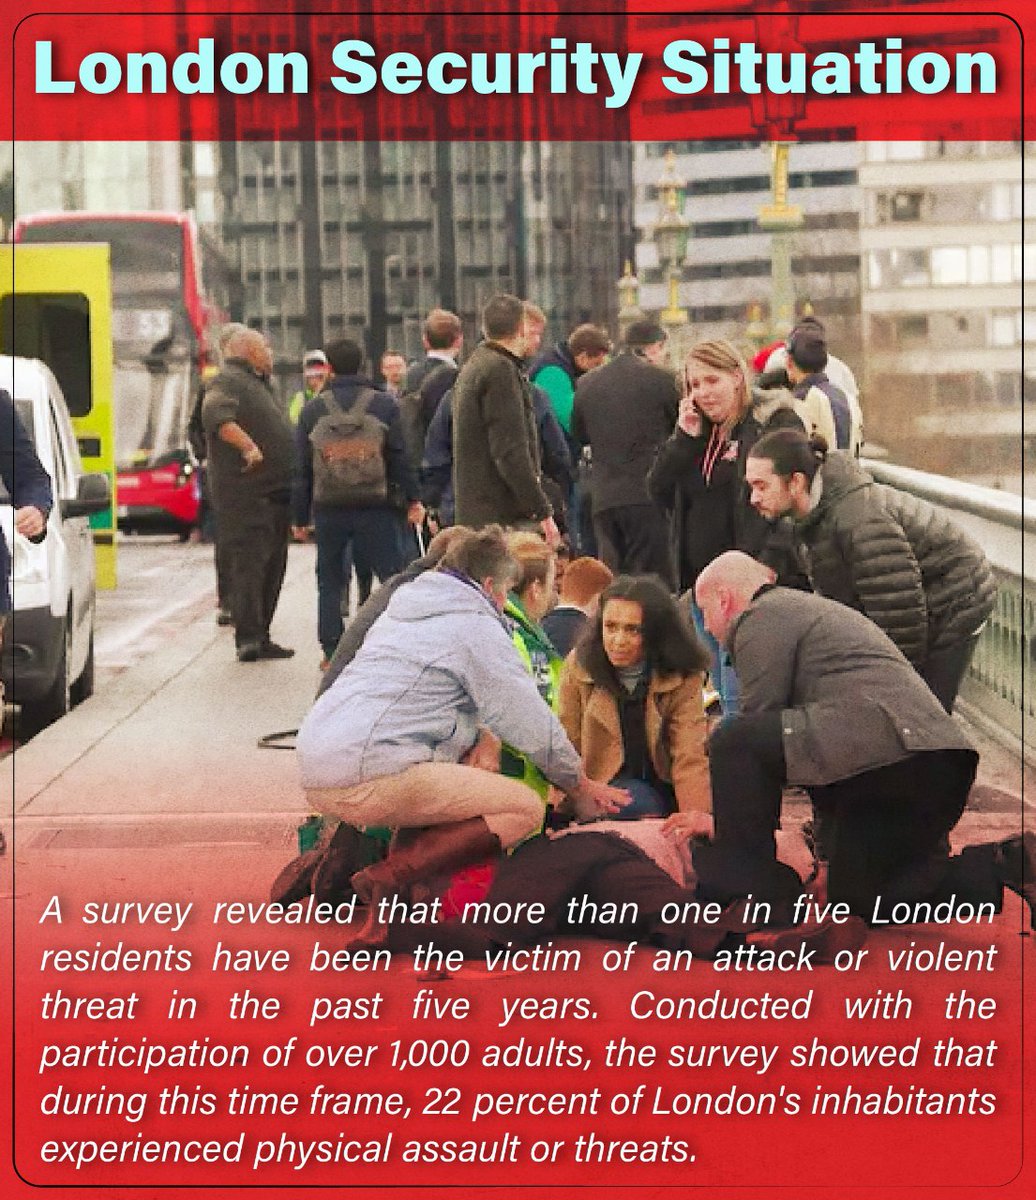 Security situation in London More than one in five Londoners have been the victim of an assault or threat of violence in the past five years, a survey has found. The survey, which involved more than 1,000 adults, found that 22% of Londoners had been physically assaulted .